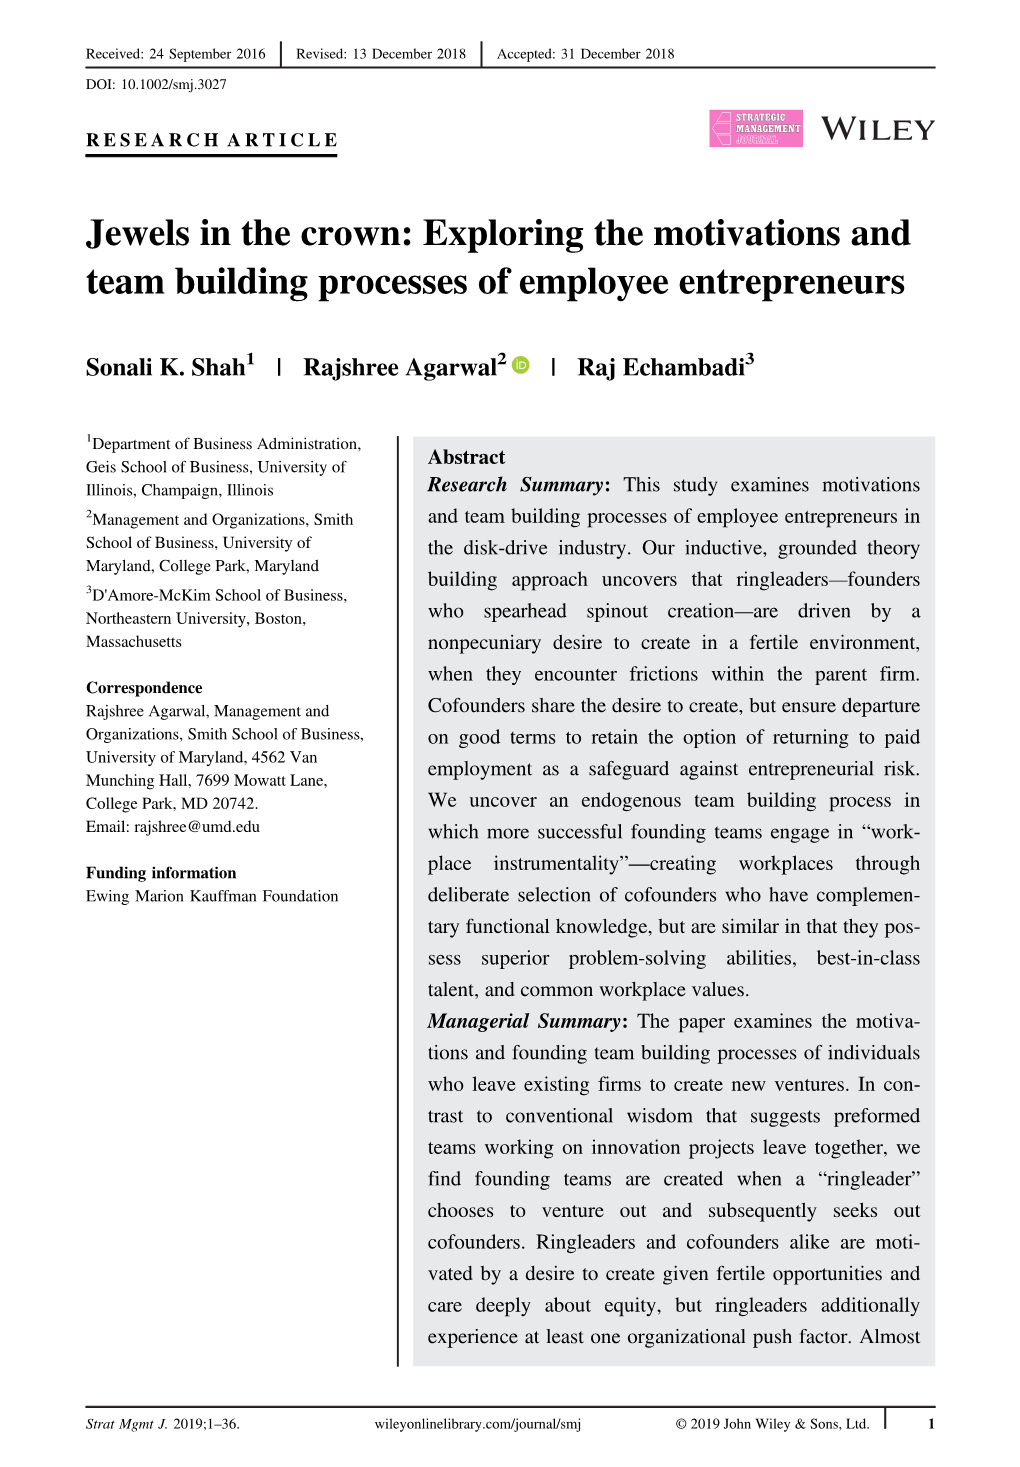 Jewels in the Crown: Exploring the Motivations and Team Building Processes of Employee Entrepreneurs